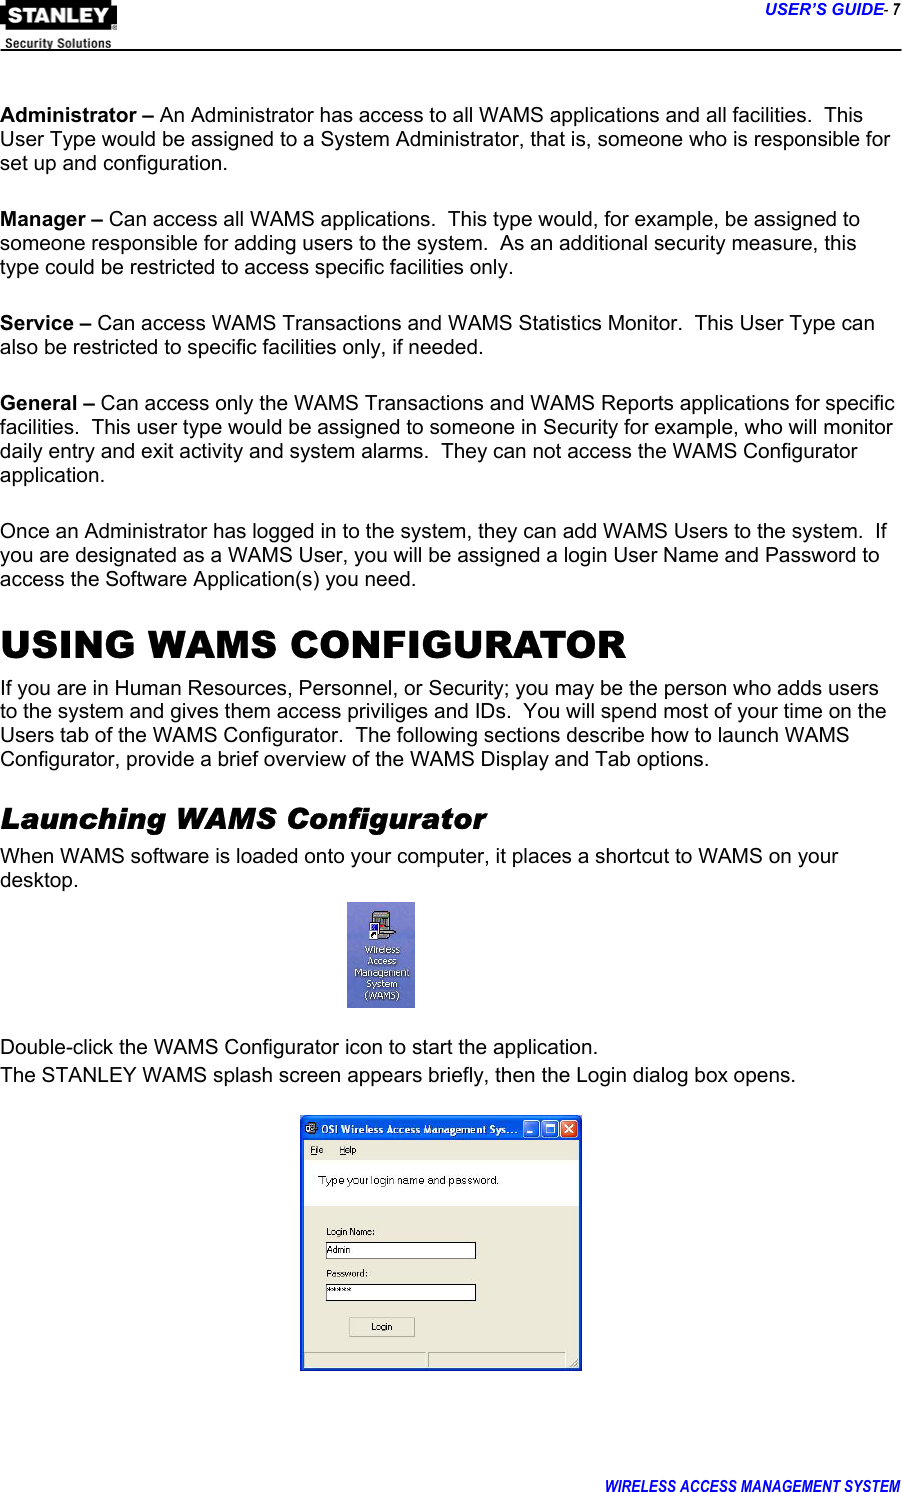      USER’S GUIDE- 7 WIRELESS ACCESS MANAGEMENT SYSTEM   Administrator – An Administrator has access to all WAMS applications and all facilities.  This User Type would be assigned to a System Administrator, that is, someone who is responsible for set up and configuration.  Manager – Can access all WAMS applications.  This type would, for example, be assigned to someone responsible for adding users to the system.  As an additional security measure, this type could be restricted to access specific facilities only.    Service – Can access WAMS Transactions and WAMS Statistics Monitor.  This User Type can also be restricted to specific facilities only, if needed.  General – Can access only the WAMS Transactions and WAMS Reports applications for specific facilities.  This user type would be assigned to someone in Security for example, who will monitor daily entry and exit activity and system alarms.  They can not access the WAMS Configurator application.  Once an Administrator has logged in to the system, they can add WAMS Users to the system.  If you are designated as a WAMS User, you will be assigned a login User Name and Password to access the Software Application(s) you need.   USING WAMS CONFIGURATOR If you are in Human Resources, Personnel, or Security; you may be the person who adds users to the system and gives them access priviliges and IDs.  You will spend most of your time on the Users tab of the WAMS Configurator.  The following sections describe how to launch WAMS Configurator, provide a brief overview of the WAMS Display and Tab options. Launching WAMS Configurator When WAMS software is loaded onto your computer, it places a shortcut to WAMS on your desktop.    Double-click the WAMS Configurator icon to start the application. The STANLEY WAMS splash screen appears briefly, then the Login dialog box opens.            